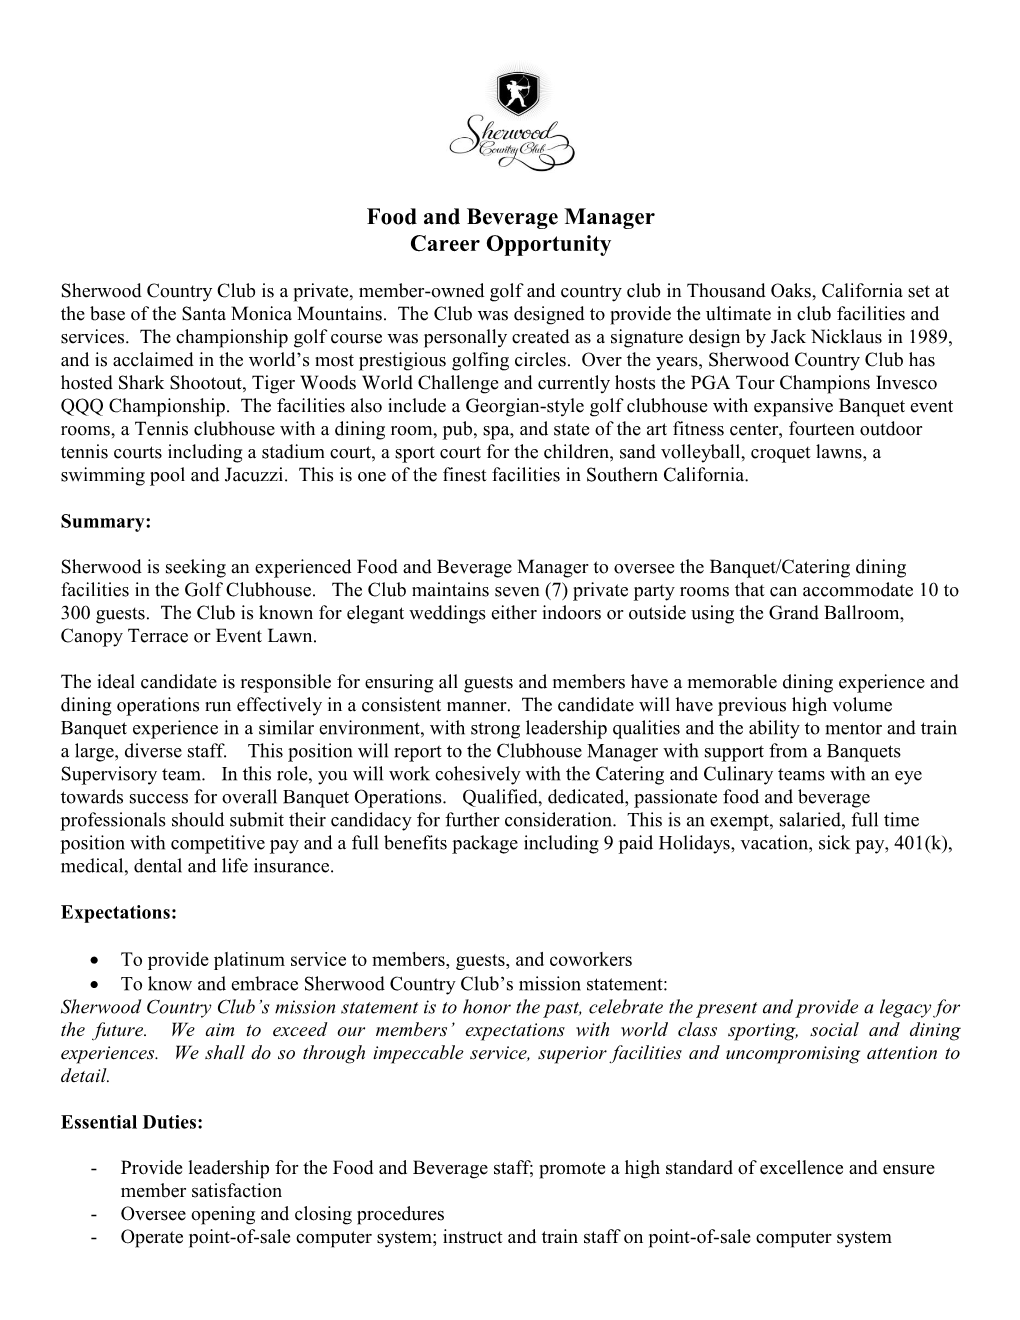 Food and Beverage Manager Career Opportunity